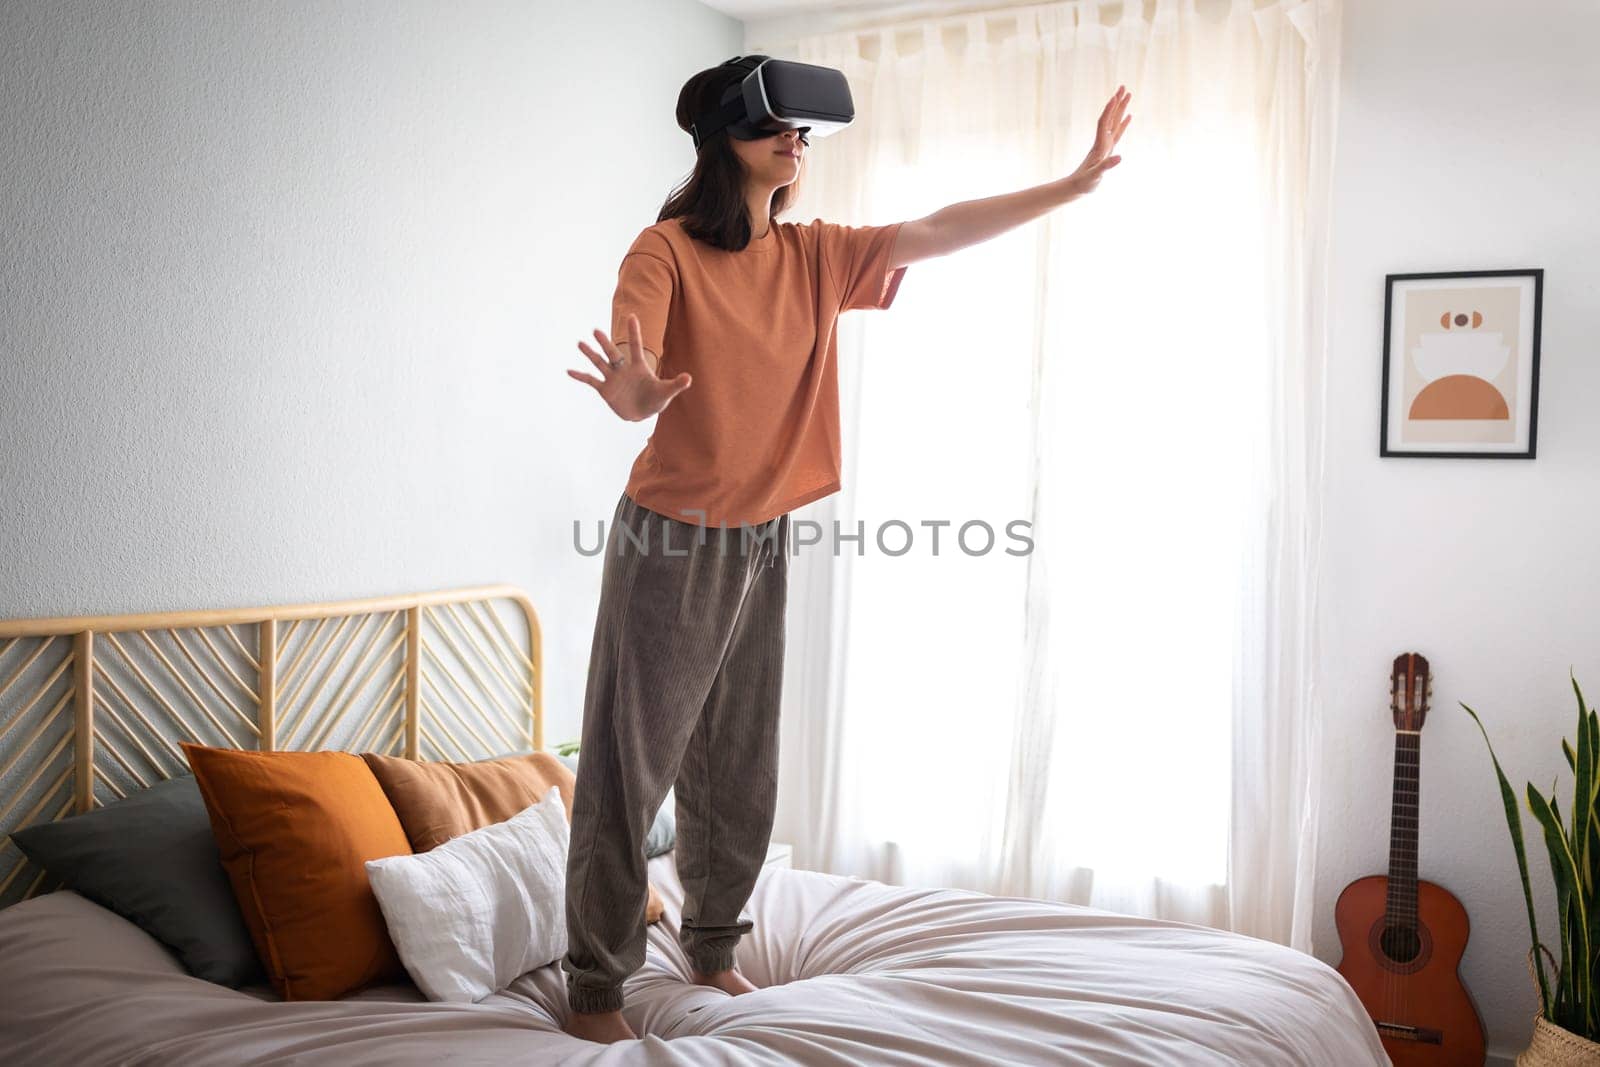 Teen girl standing on bed, moving hands touching objects in 3D world video game using VR headset. Young woman using virtual reality goggles at home bedroom. Copy space. Modern technology.